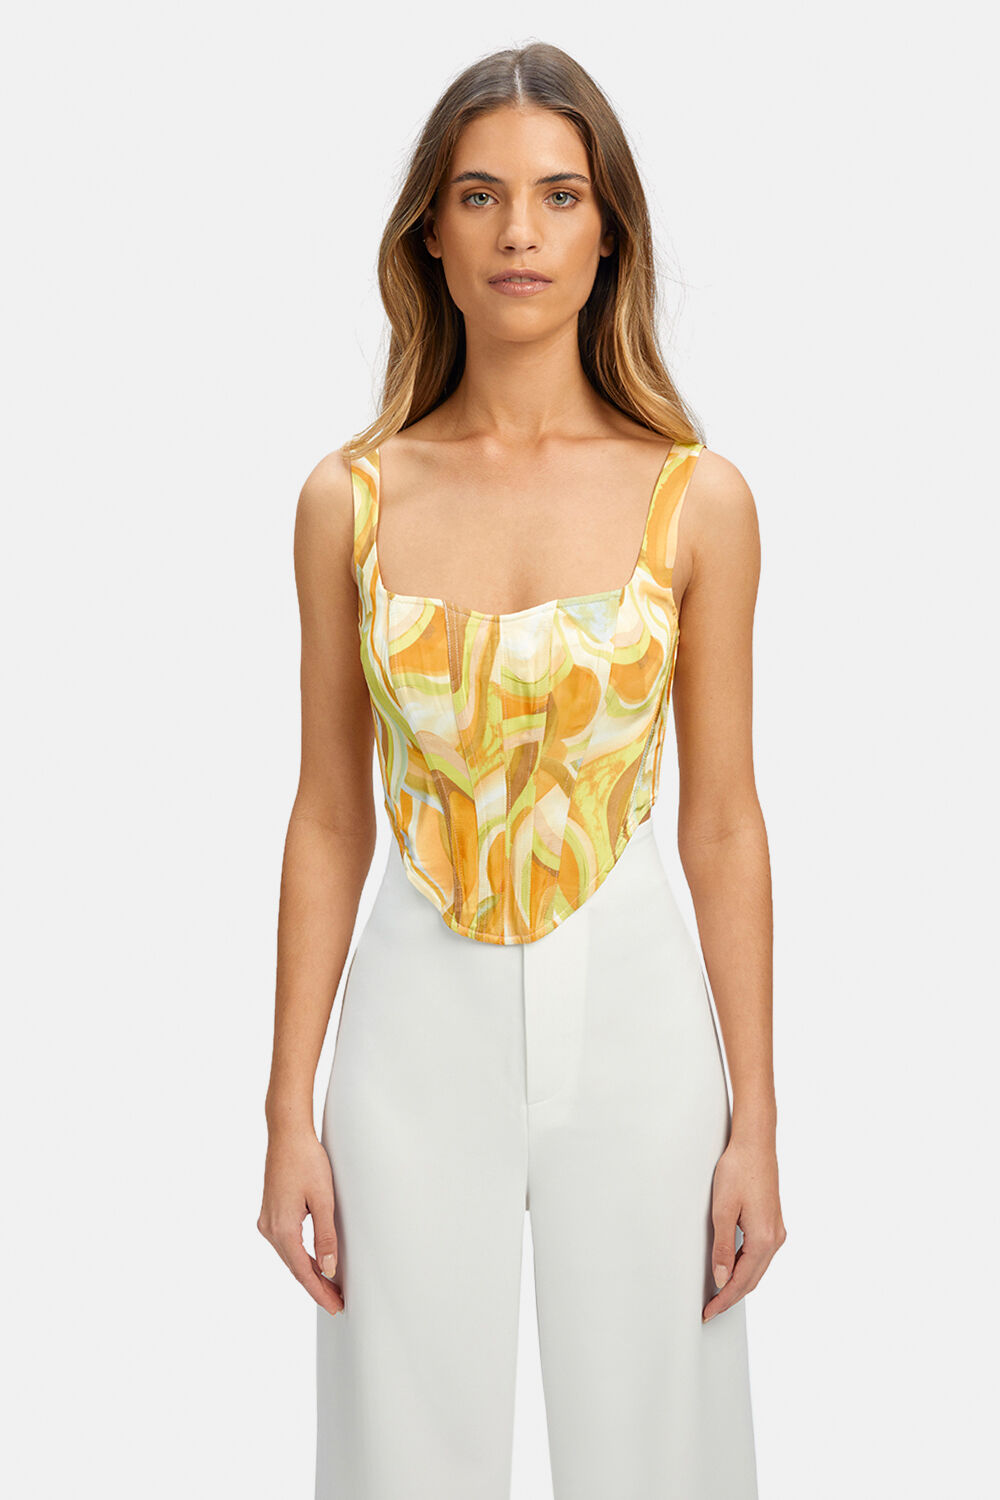 TIANI CORSET BUSTIER in colour SPECTRA YELLOW